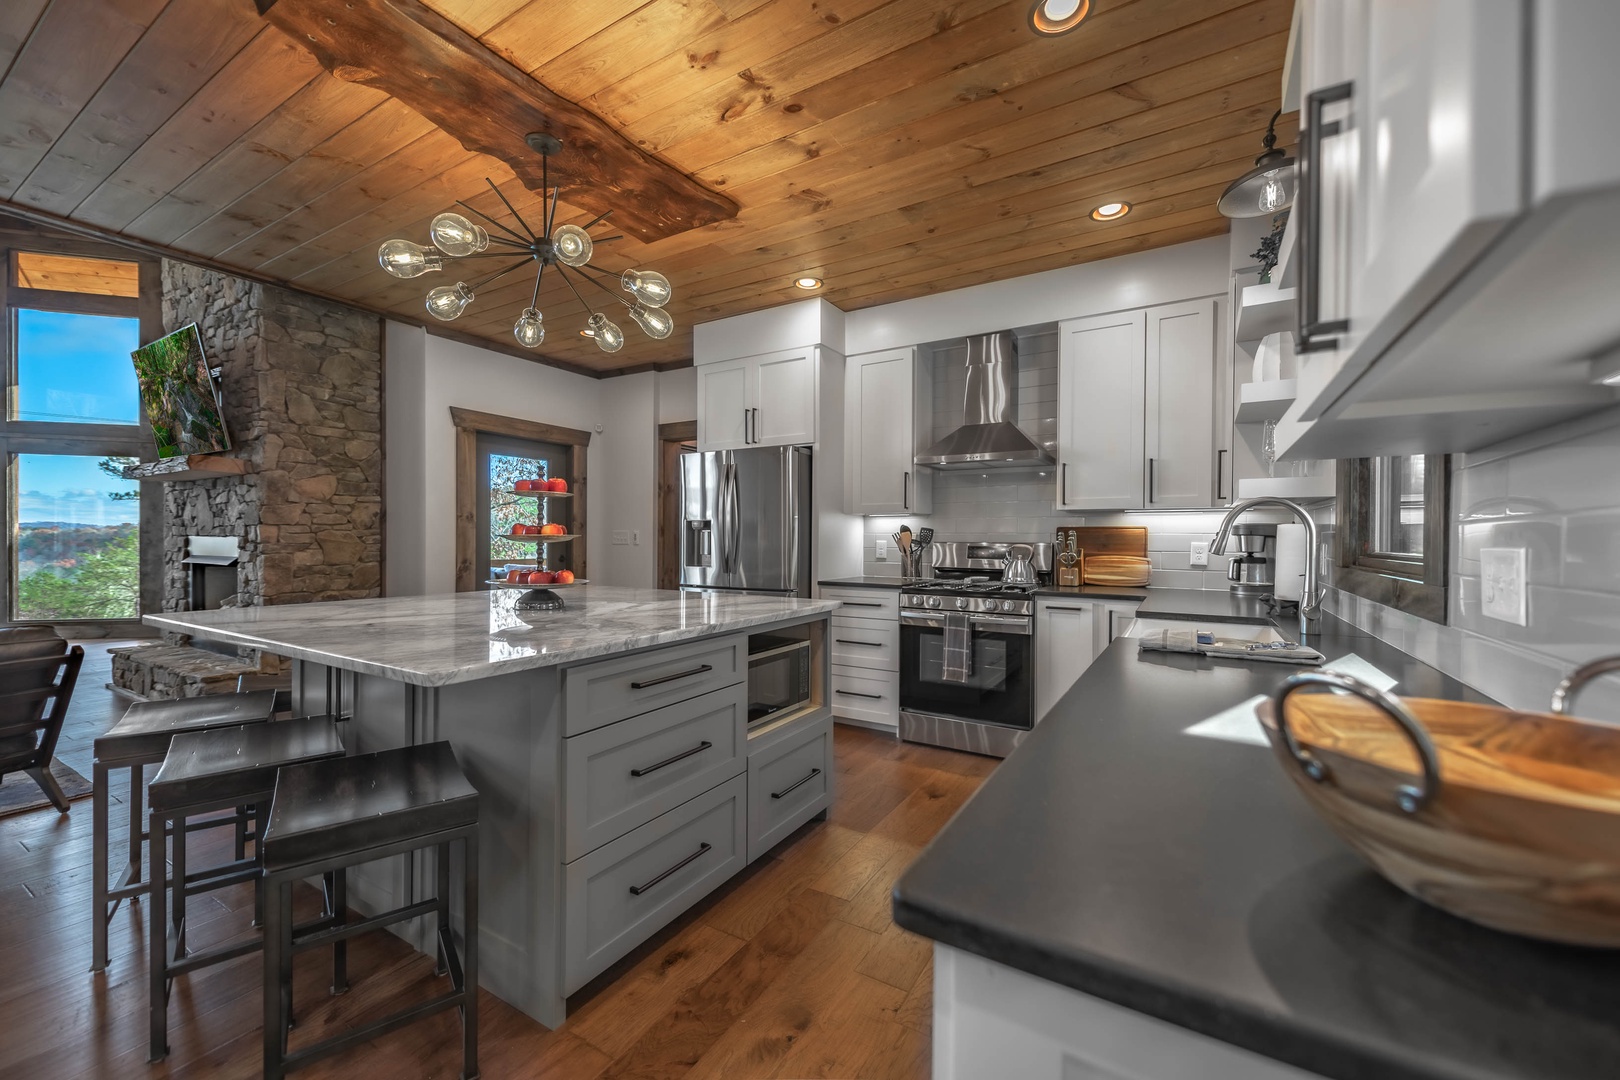 The Ridgeline Retreat- Fully equipped kitchen area with a modern design